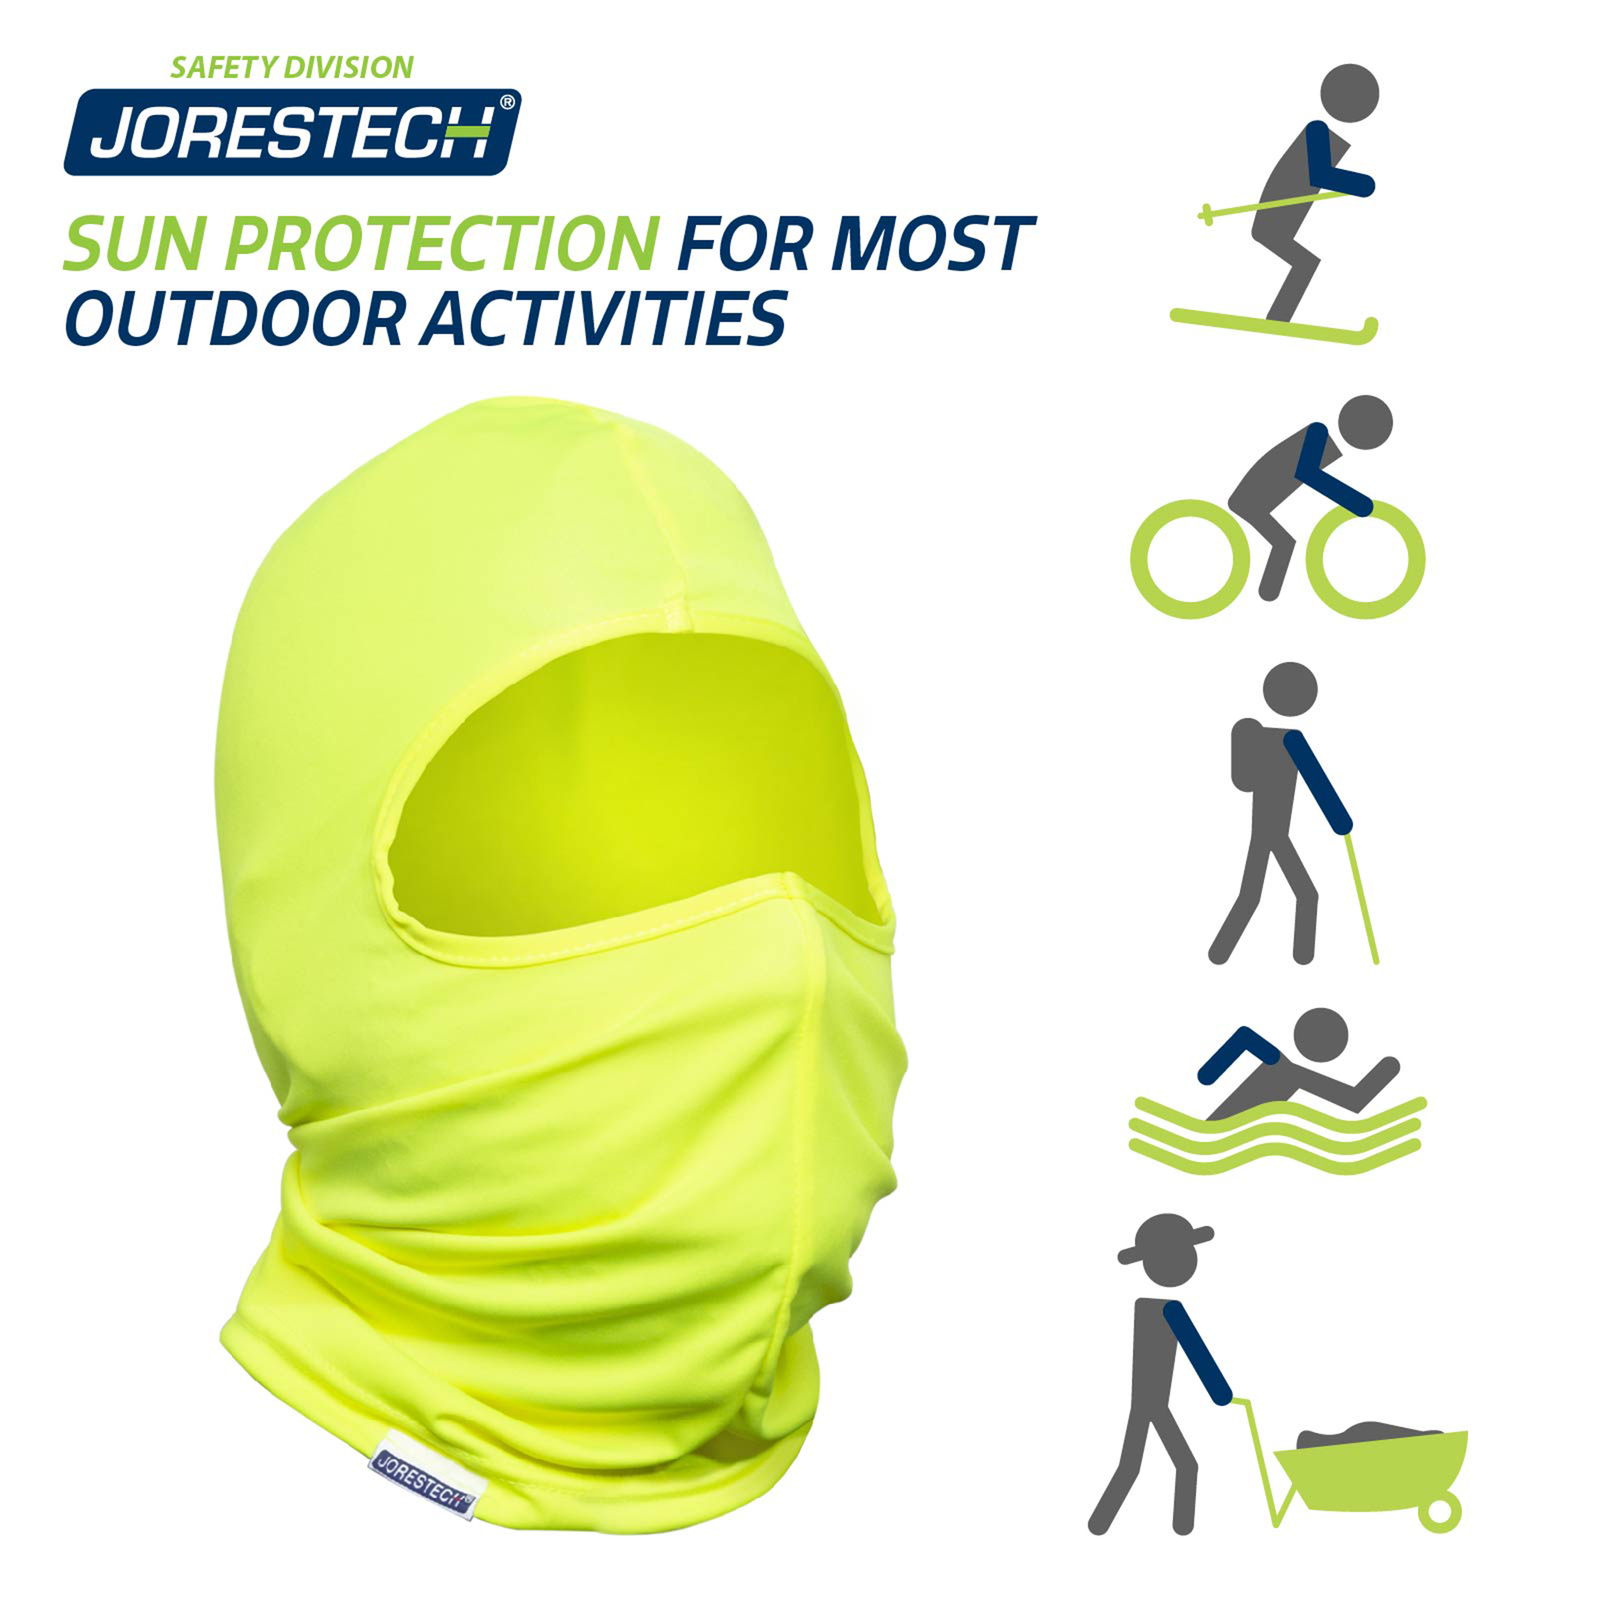 Image shows one balaclava and several icons of outdoor activities like biking, skiing, highking, swimming, construction under the sun. Banner reads: Sun protection for most outdoor activities. JORESTECH® Safety Division